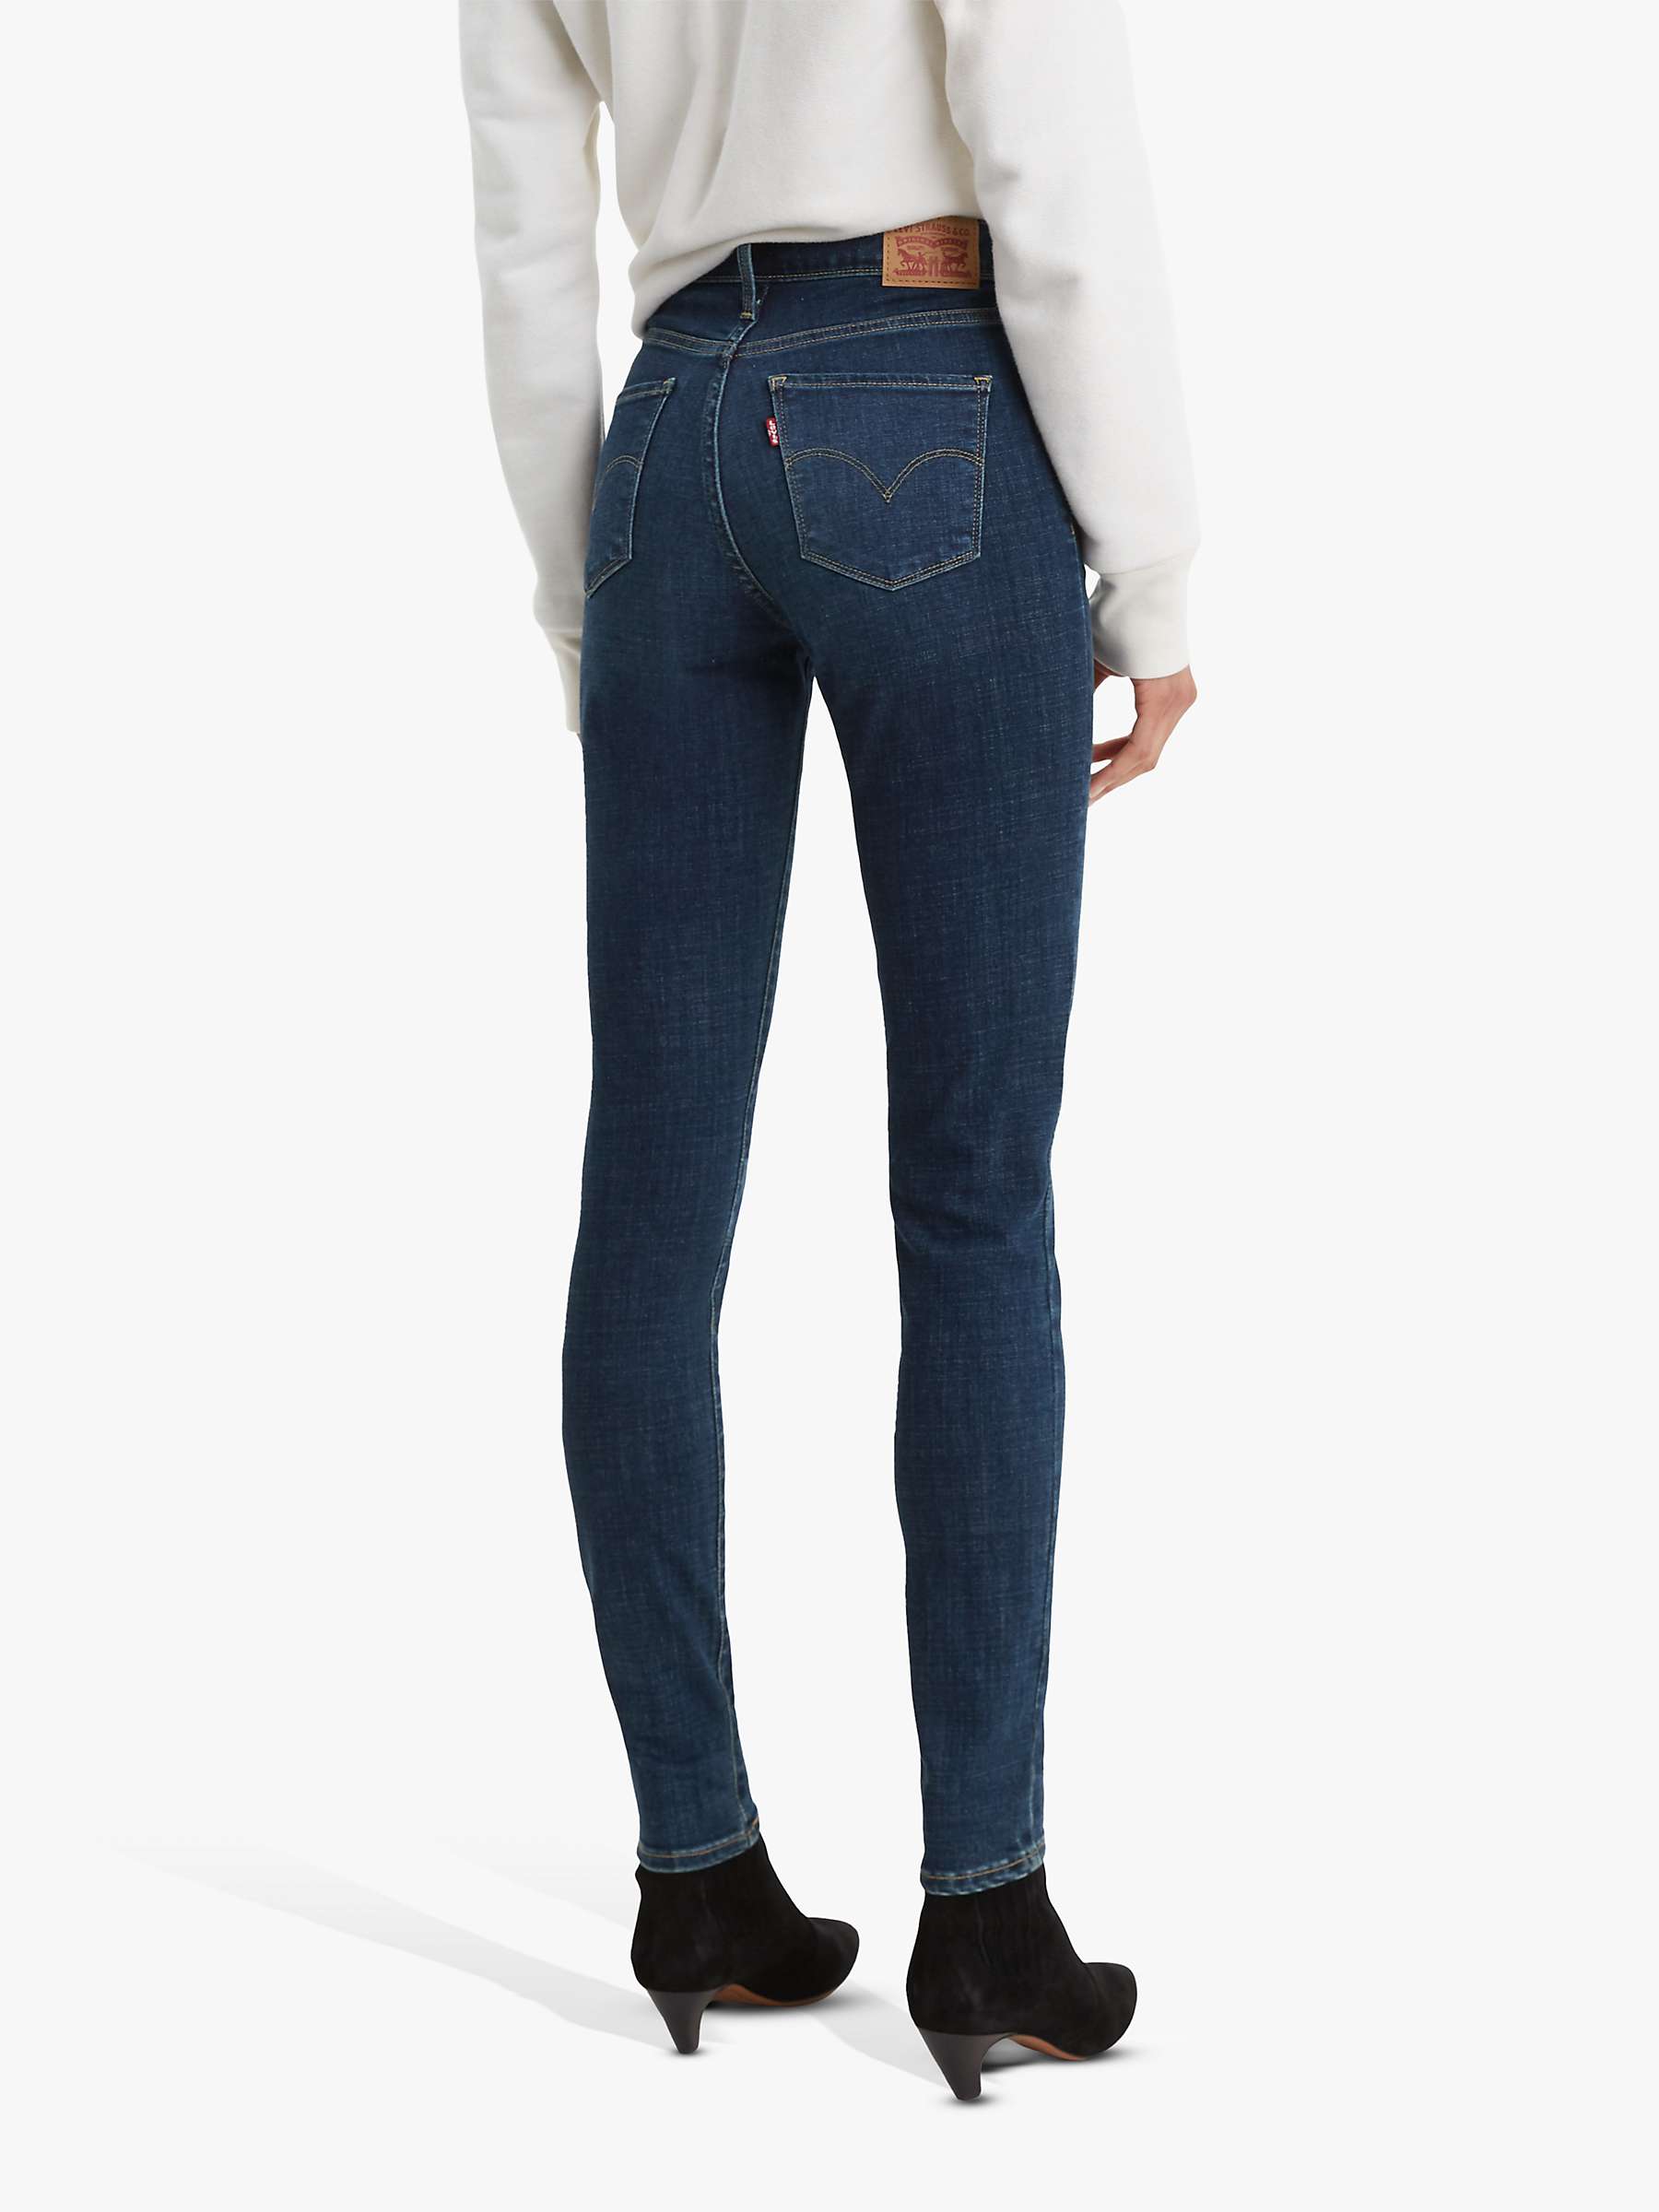 Buy Levi's 311 Shaping Skinny Jeans, Lapis Maui Views Online at johnlewis.com